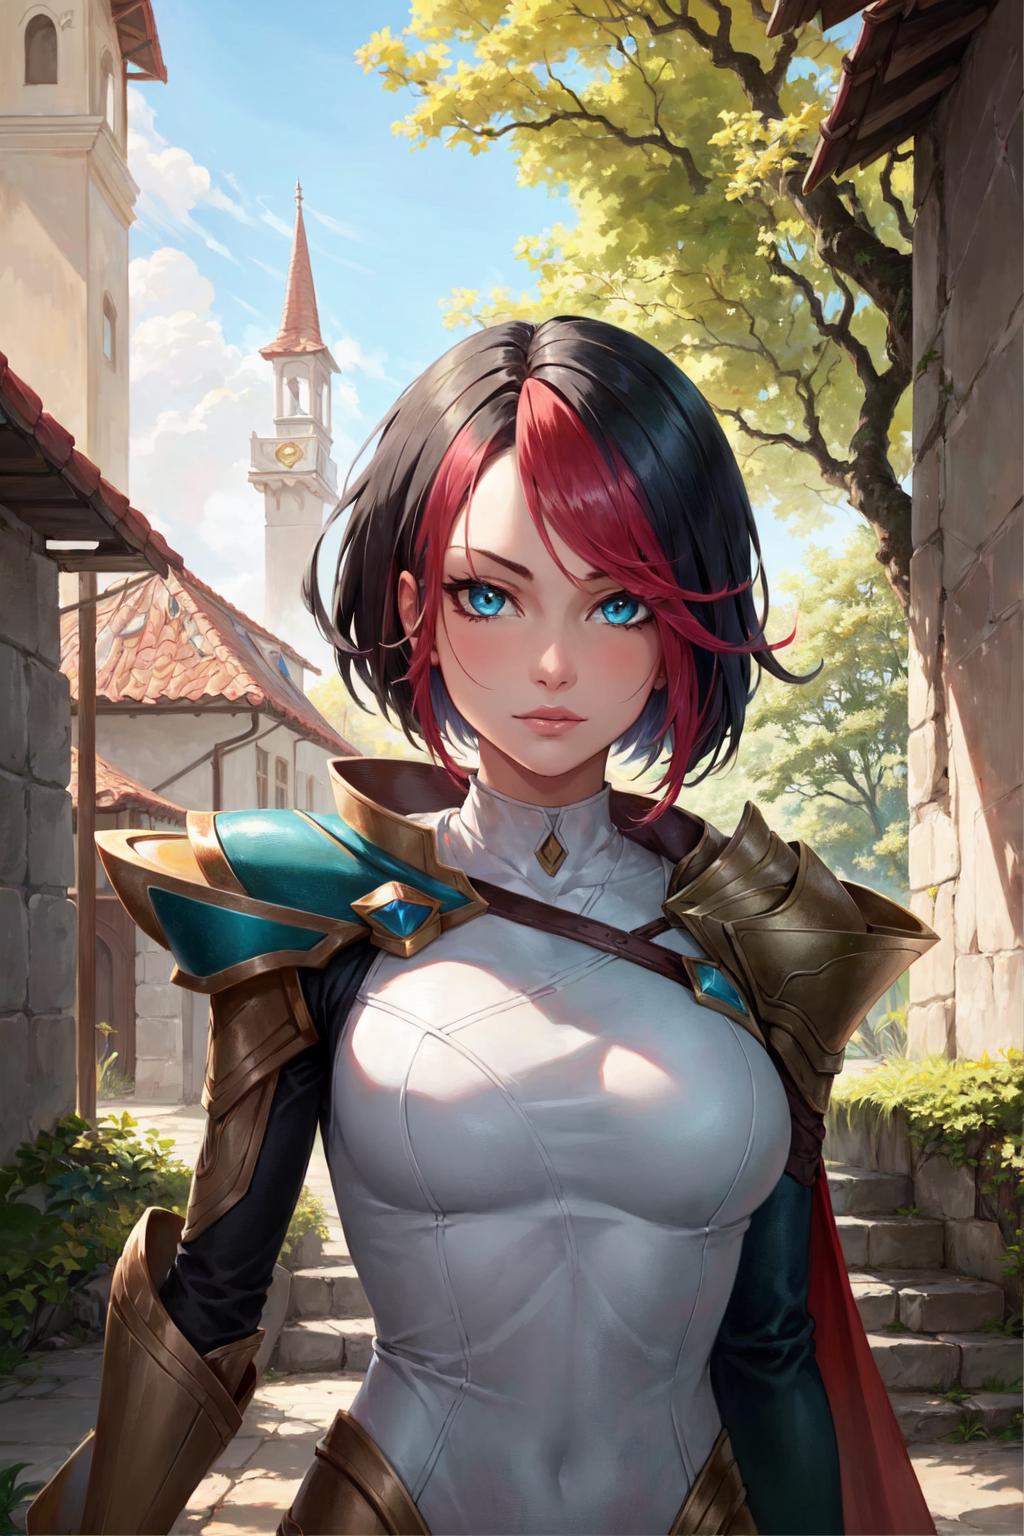 Fiora, Headmistress, Pool Party | League of Legends 3in1 image by AhriMain